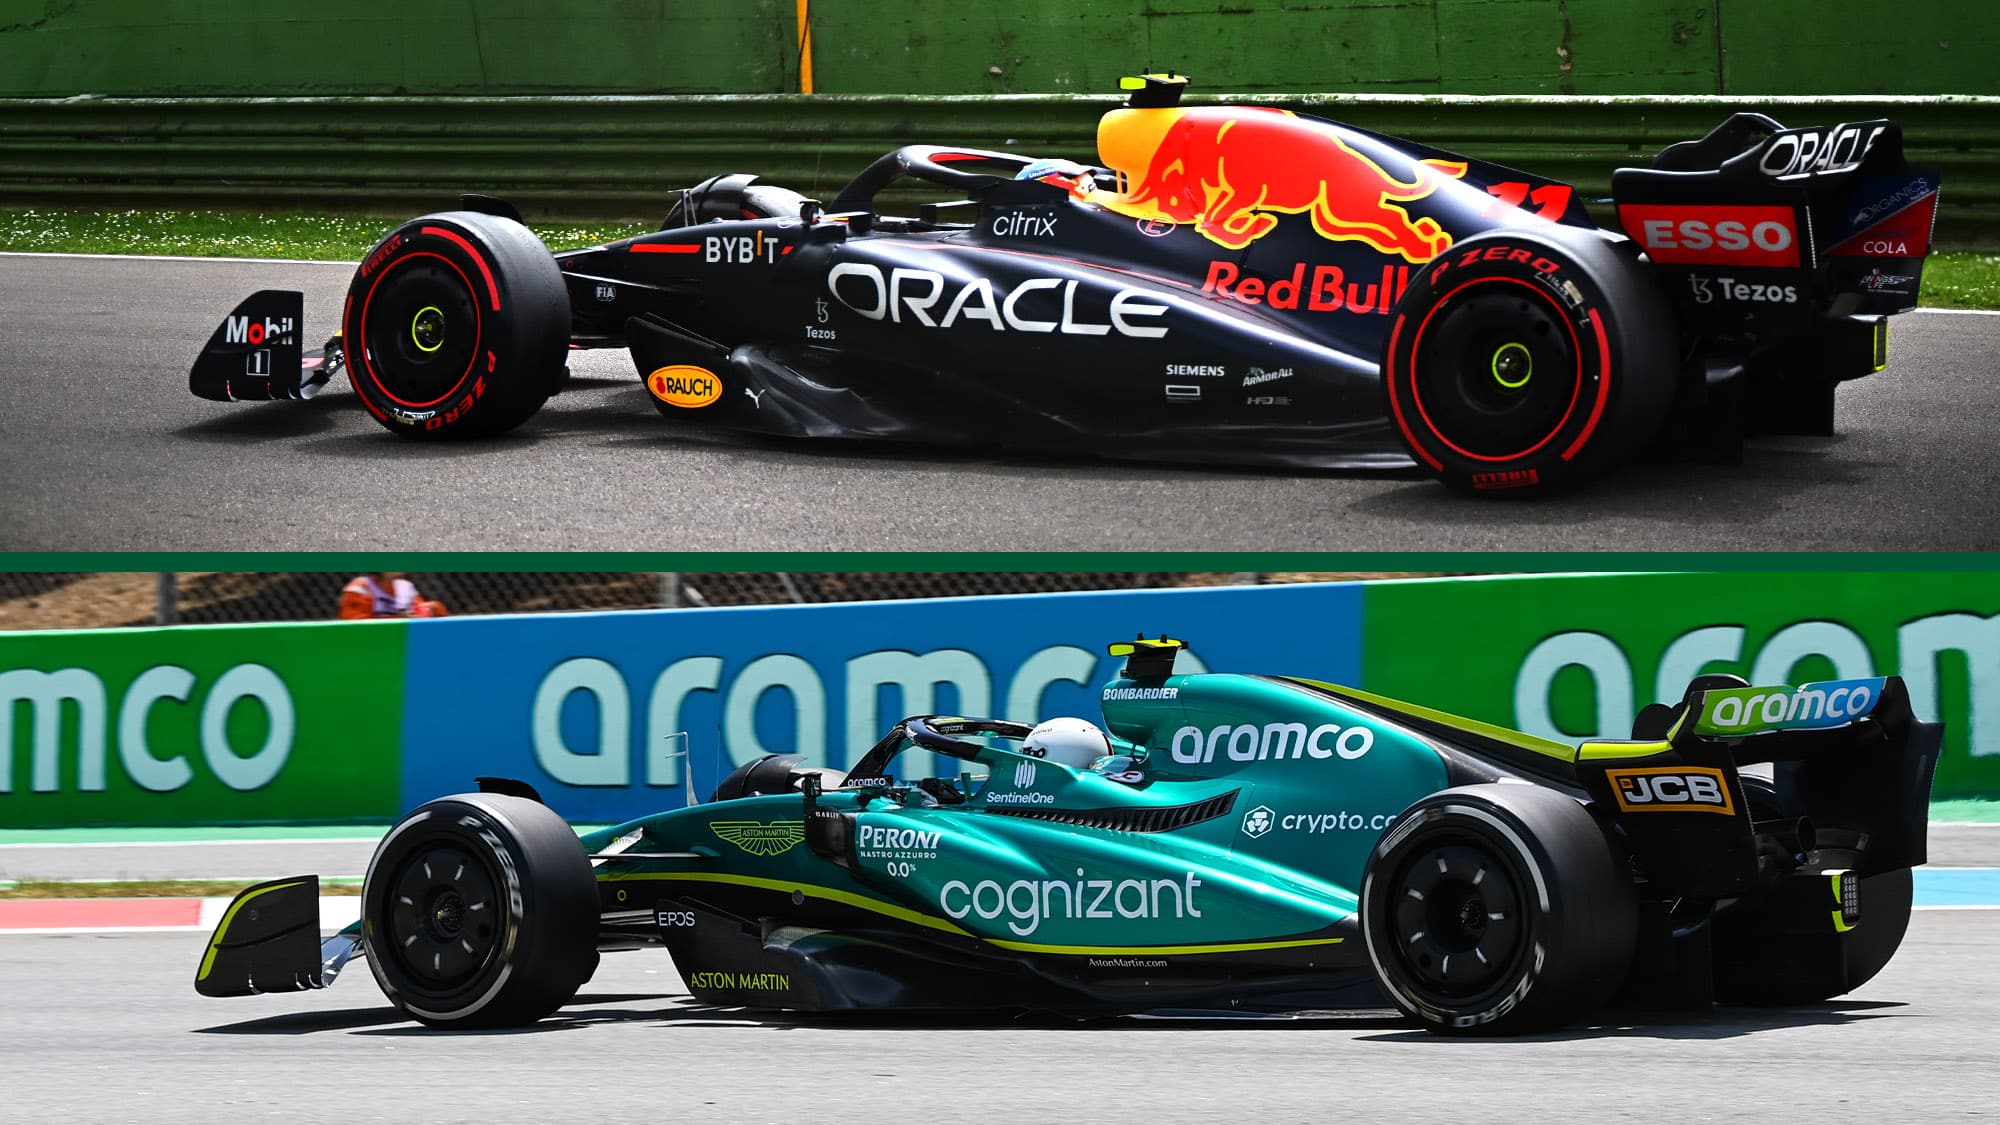 pensioen premier scheuren Why Aston Martin was cleared over new sidepods — but may have copied Red  Bull legally - Motor Sport Magazine